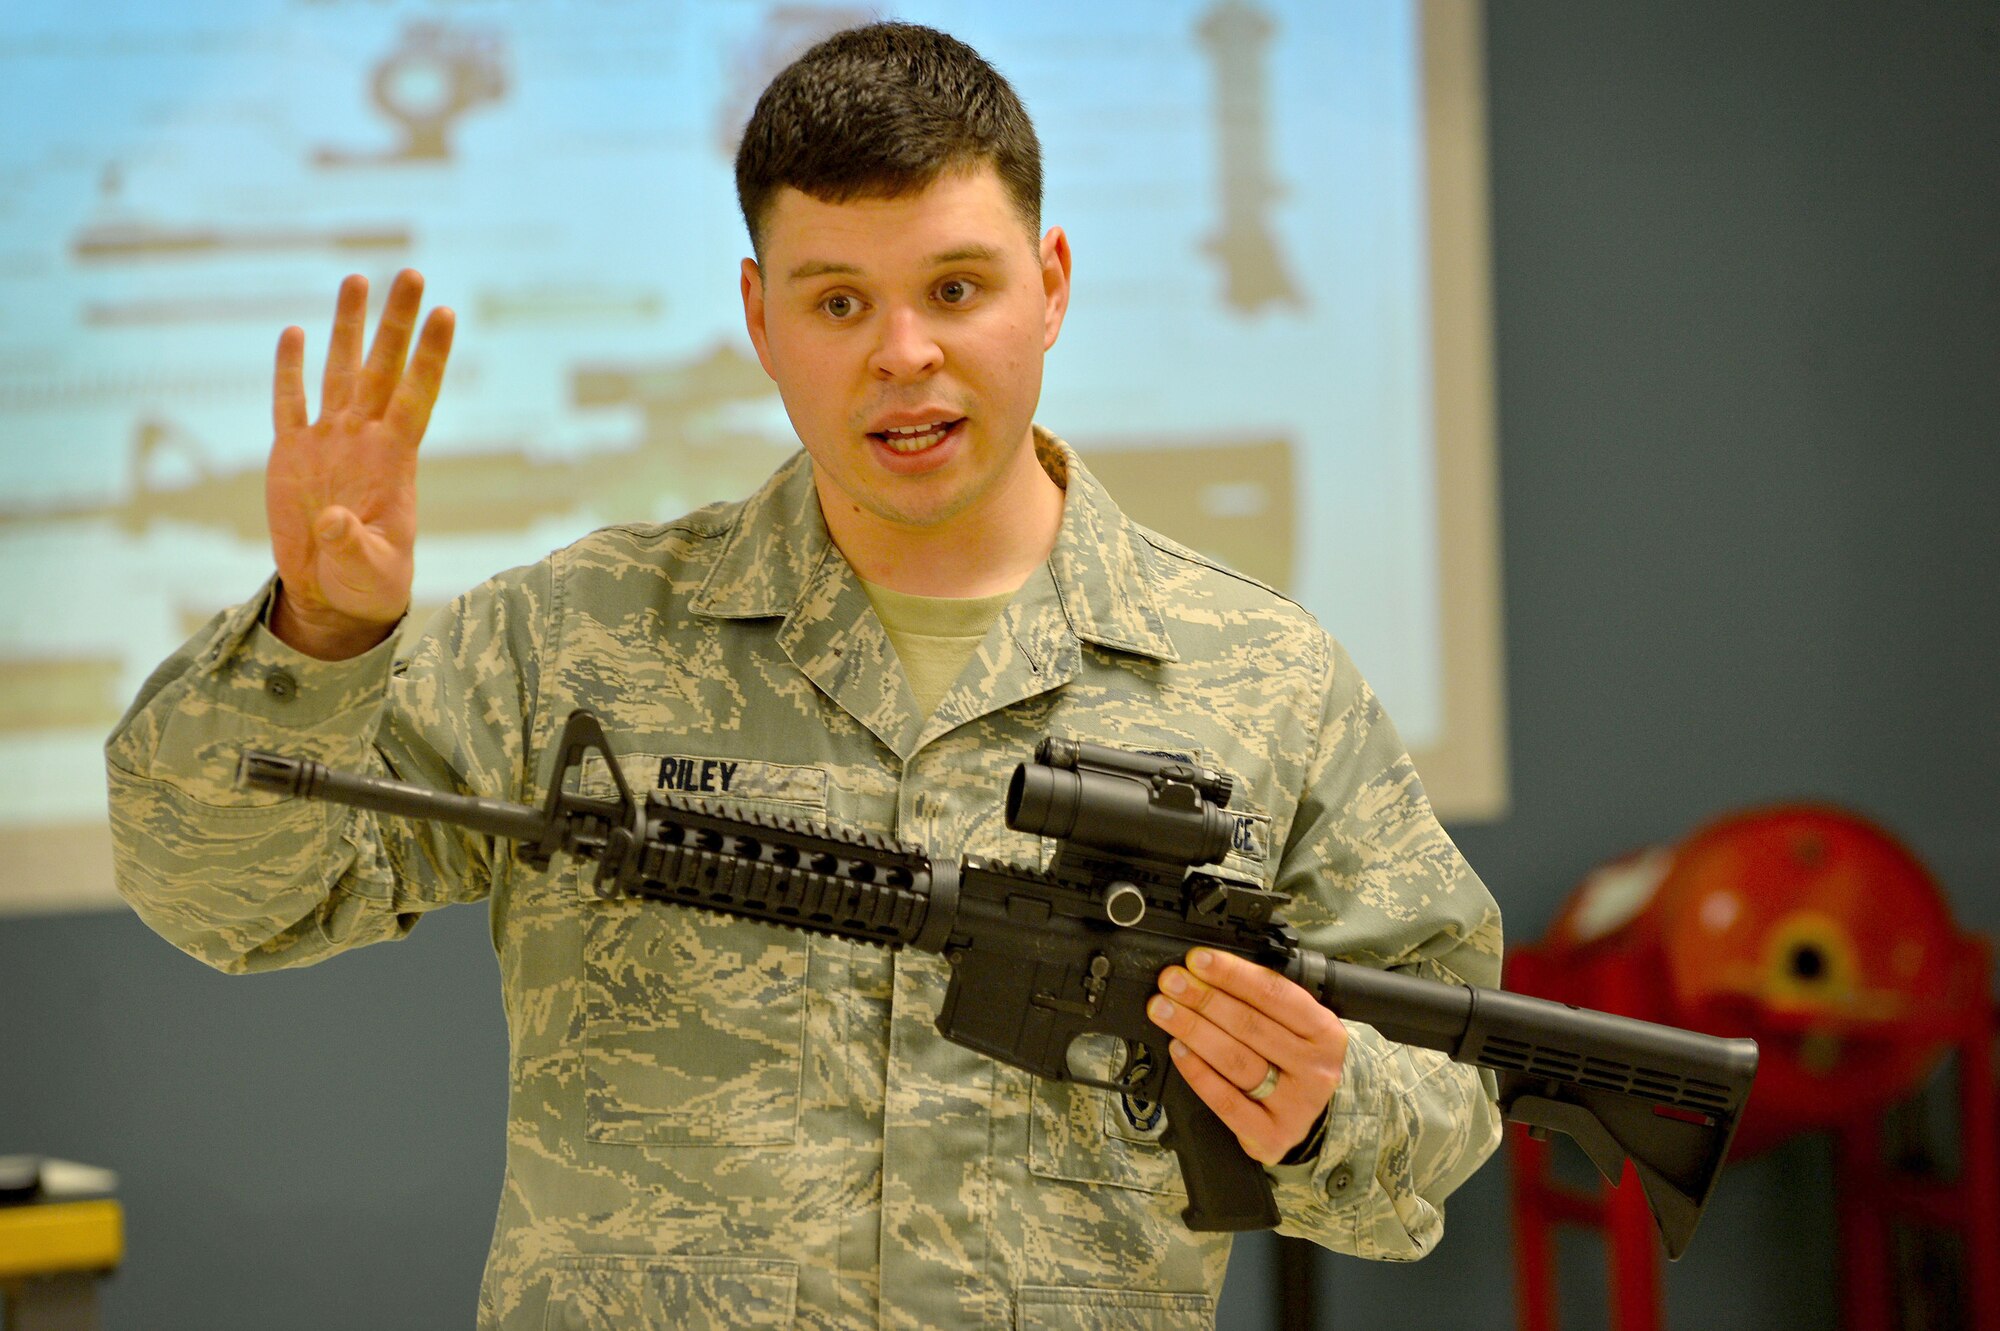 U.S. Air Force Senior Airman Robert Riley, 20th Security Forces Squadron combat arms instructor, identifies parts of the M4 carbine during combat arms training at Shaw Air Force Base, S.C., March 8, 2016. Before students are able to shoot in the range, they receive three hours of classroom instruction on weapons knowledge, safety, and shooting techniques. (U.S. Air Force photo by Senior Airman Michael Cossaboom)